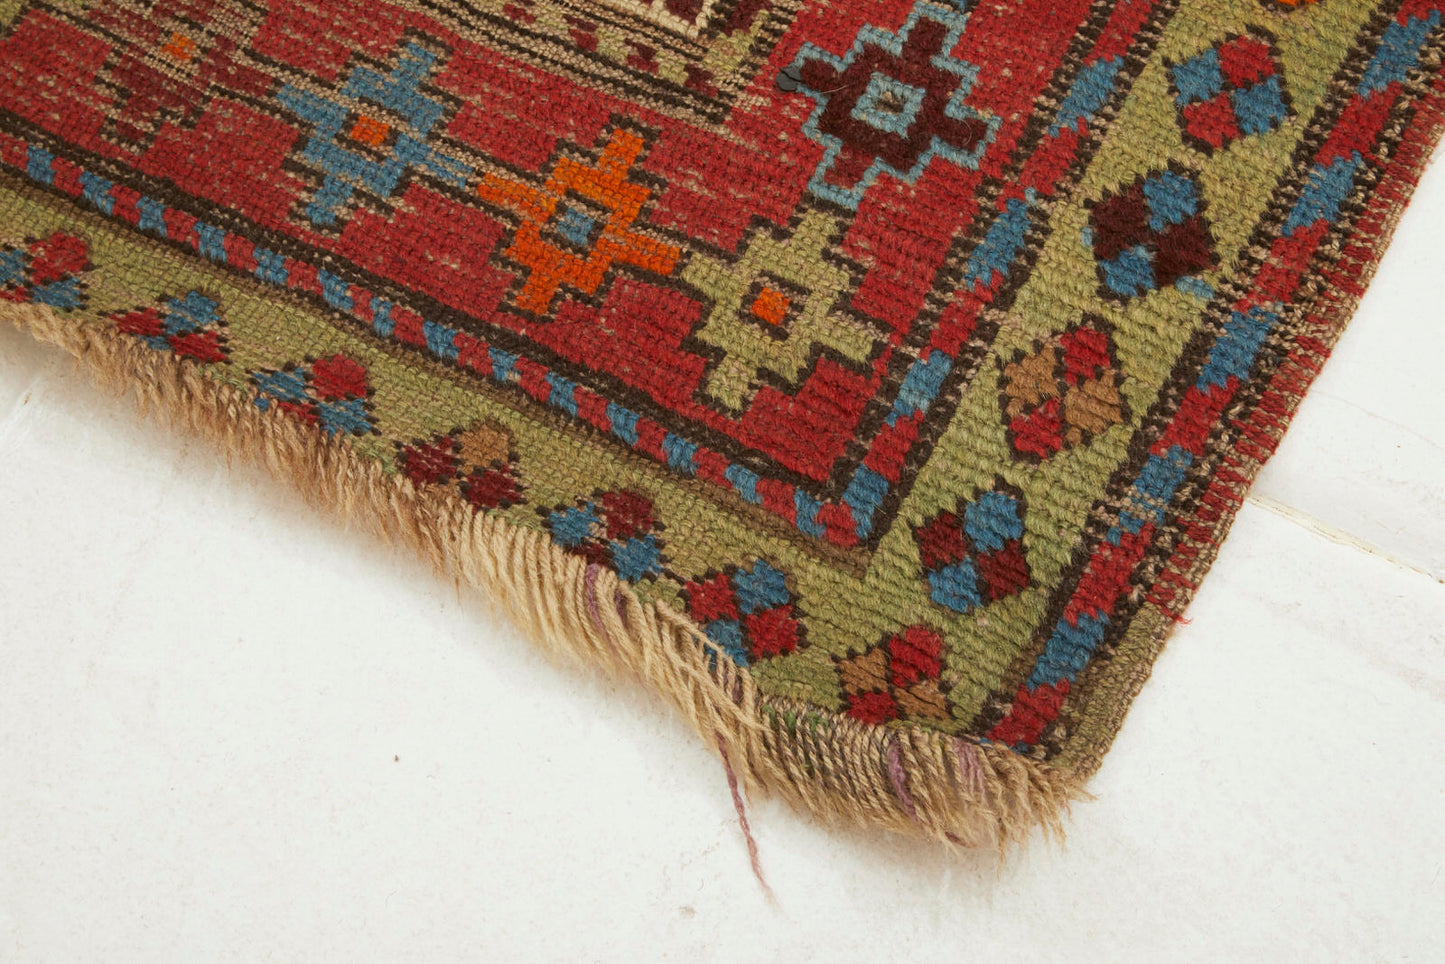 Kazak Persian Caucasian Rug with red, brown, blue and orange colors vailable from King Kennedy Rugs Los Angeles 